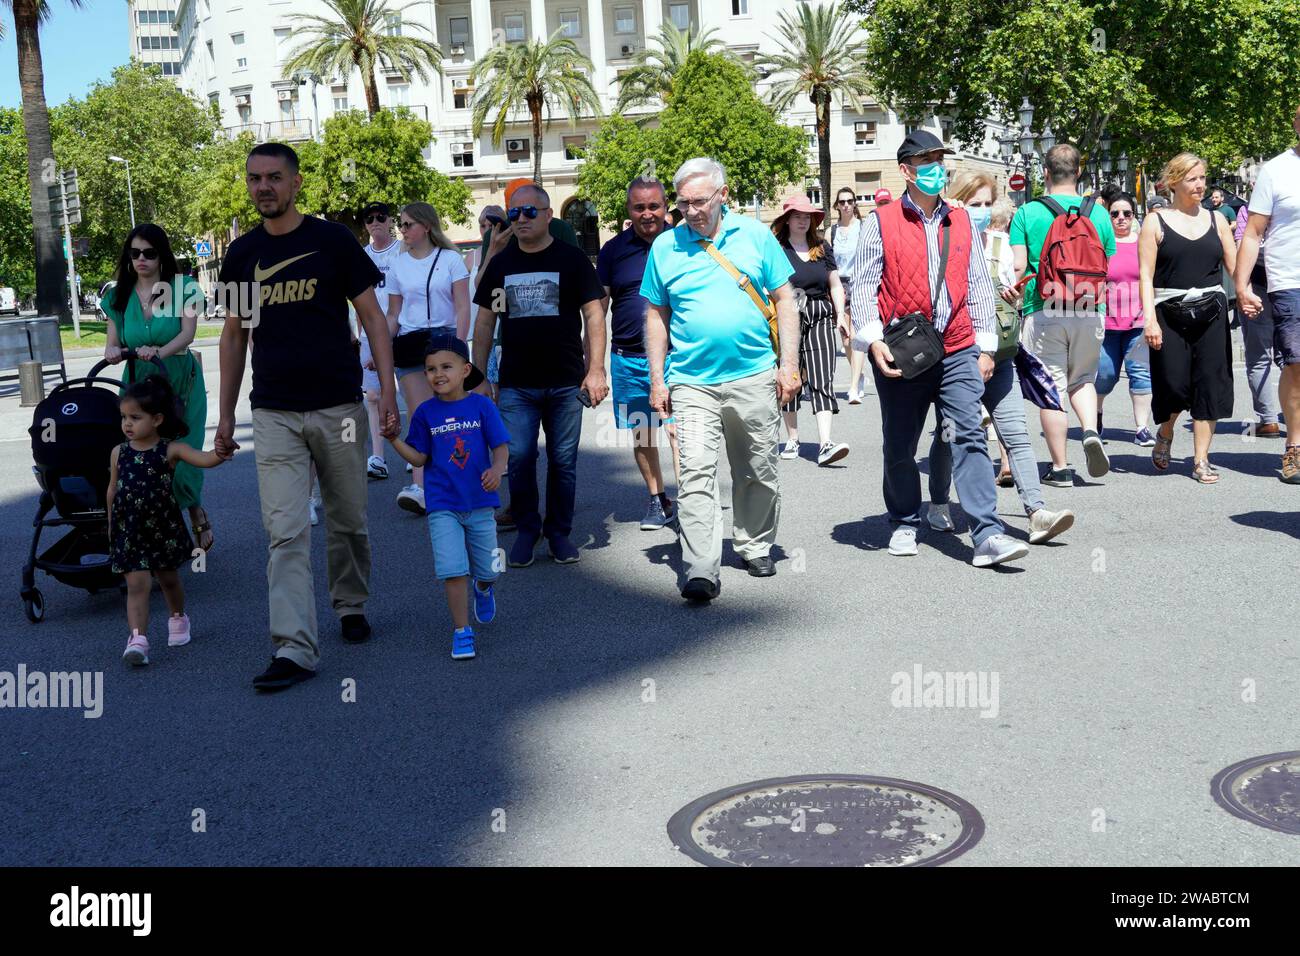 Barcelona, Spain - May 26, 2022: Large and varied group of people cross the busy road in Barcelona, faces of concern except the child who is smiling. Stock Photo